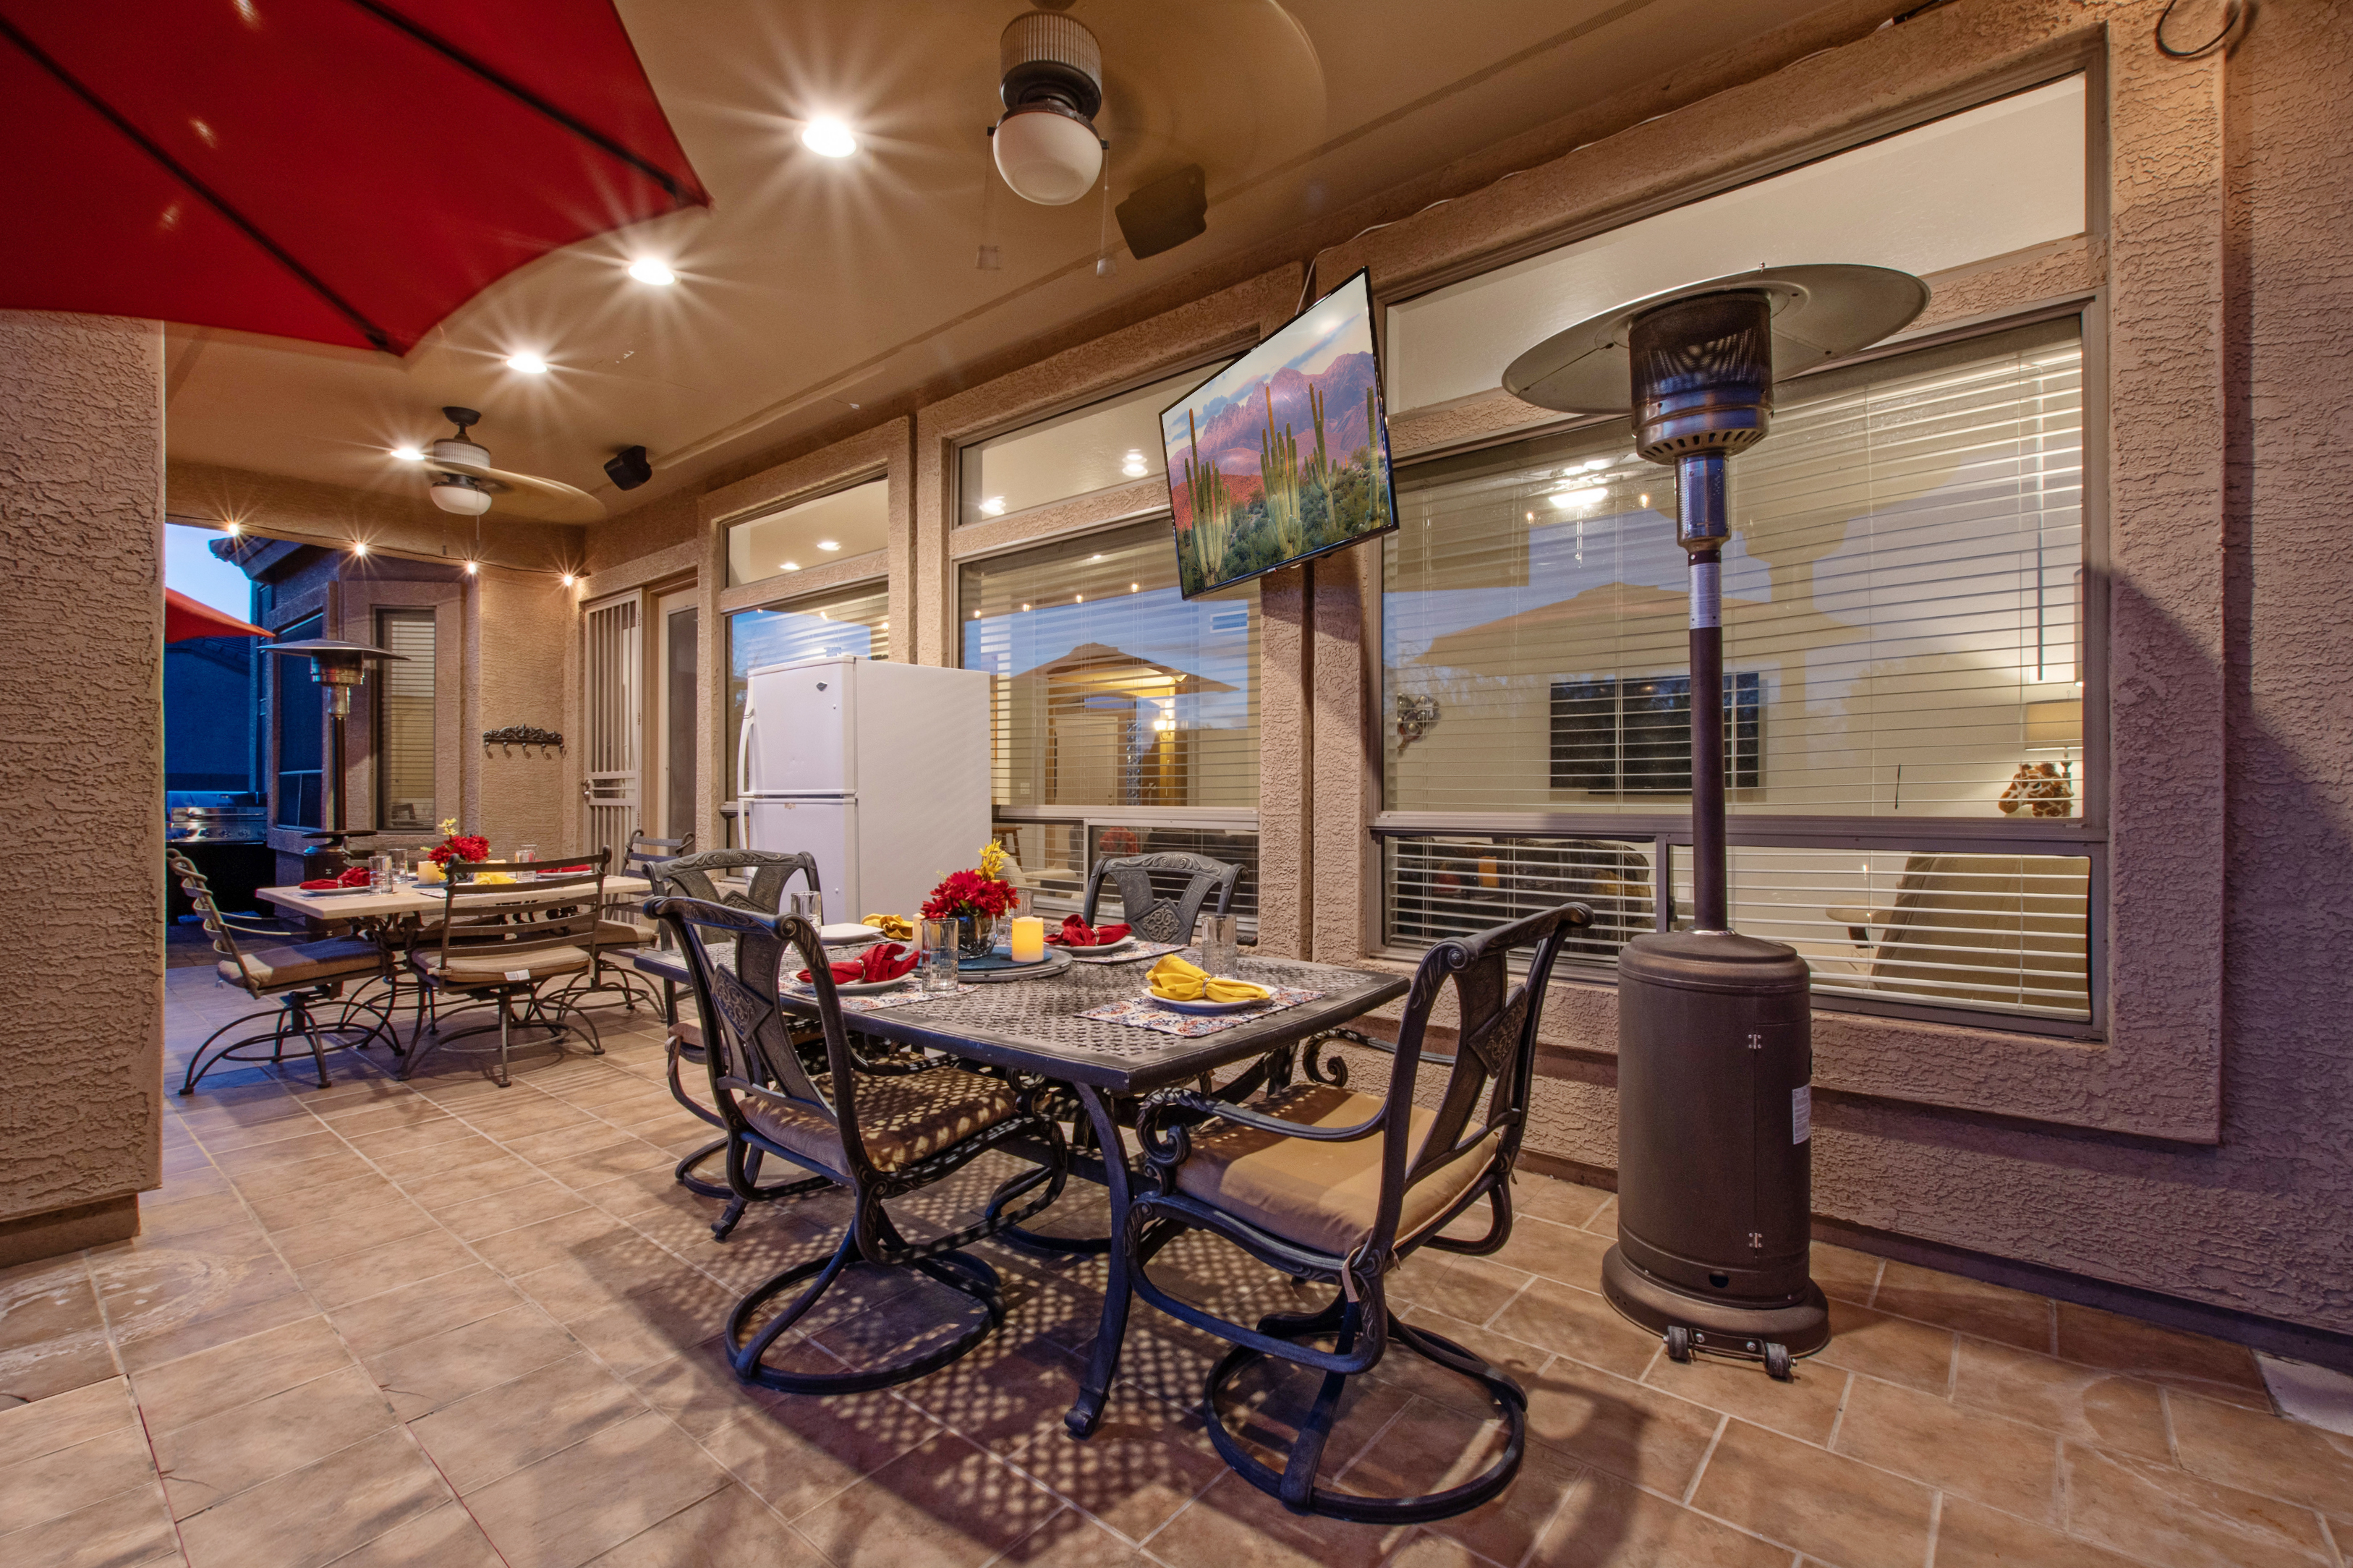 Large covered patio has dining furniture, a TV and free standing heaters for the occasional cool evening.